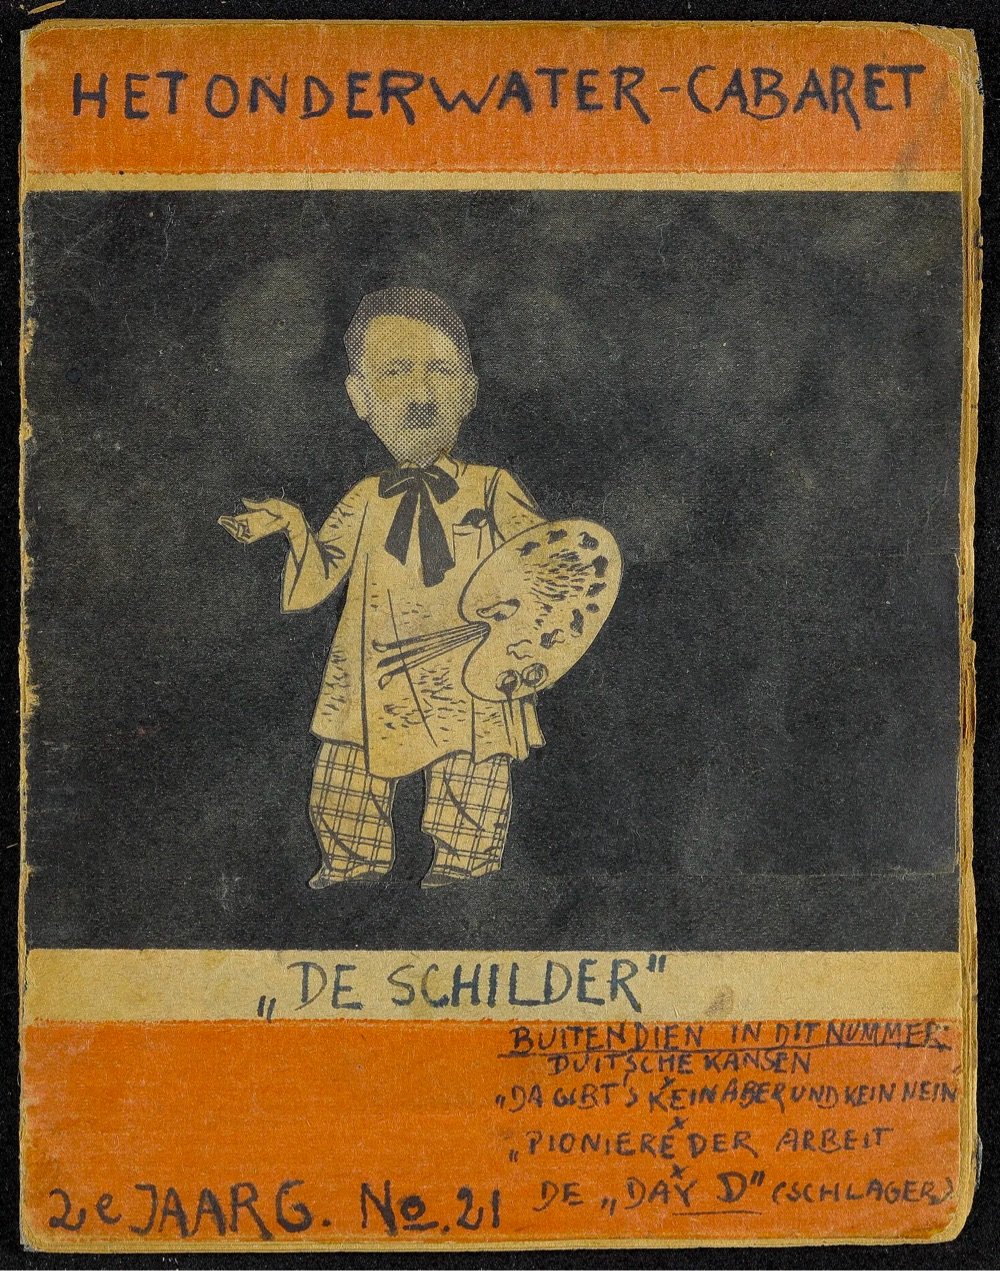 cover of a zine made in occupied Netherlands by a German Jew in hiding